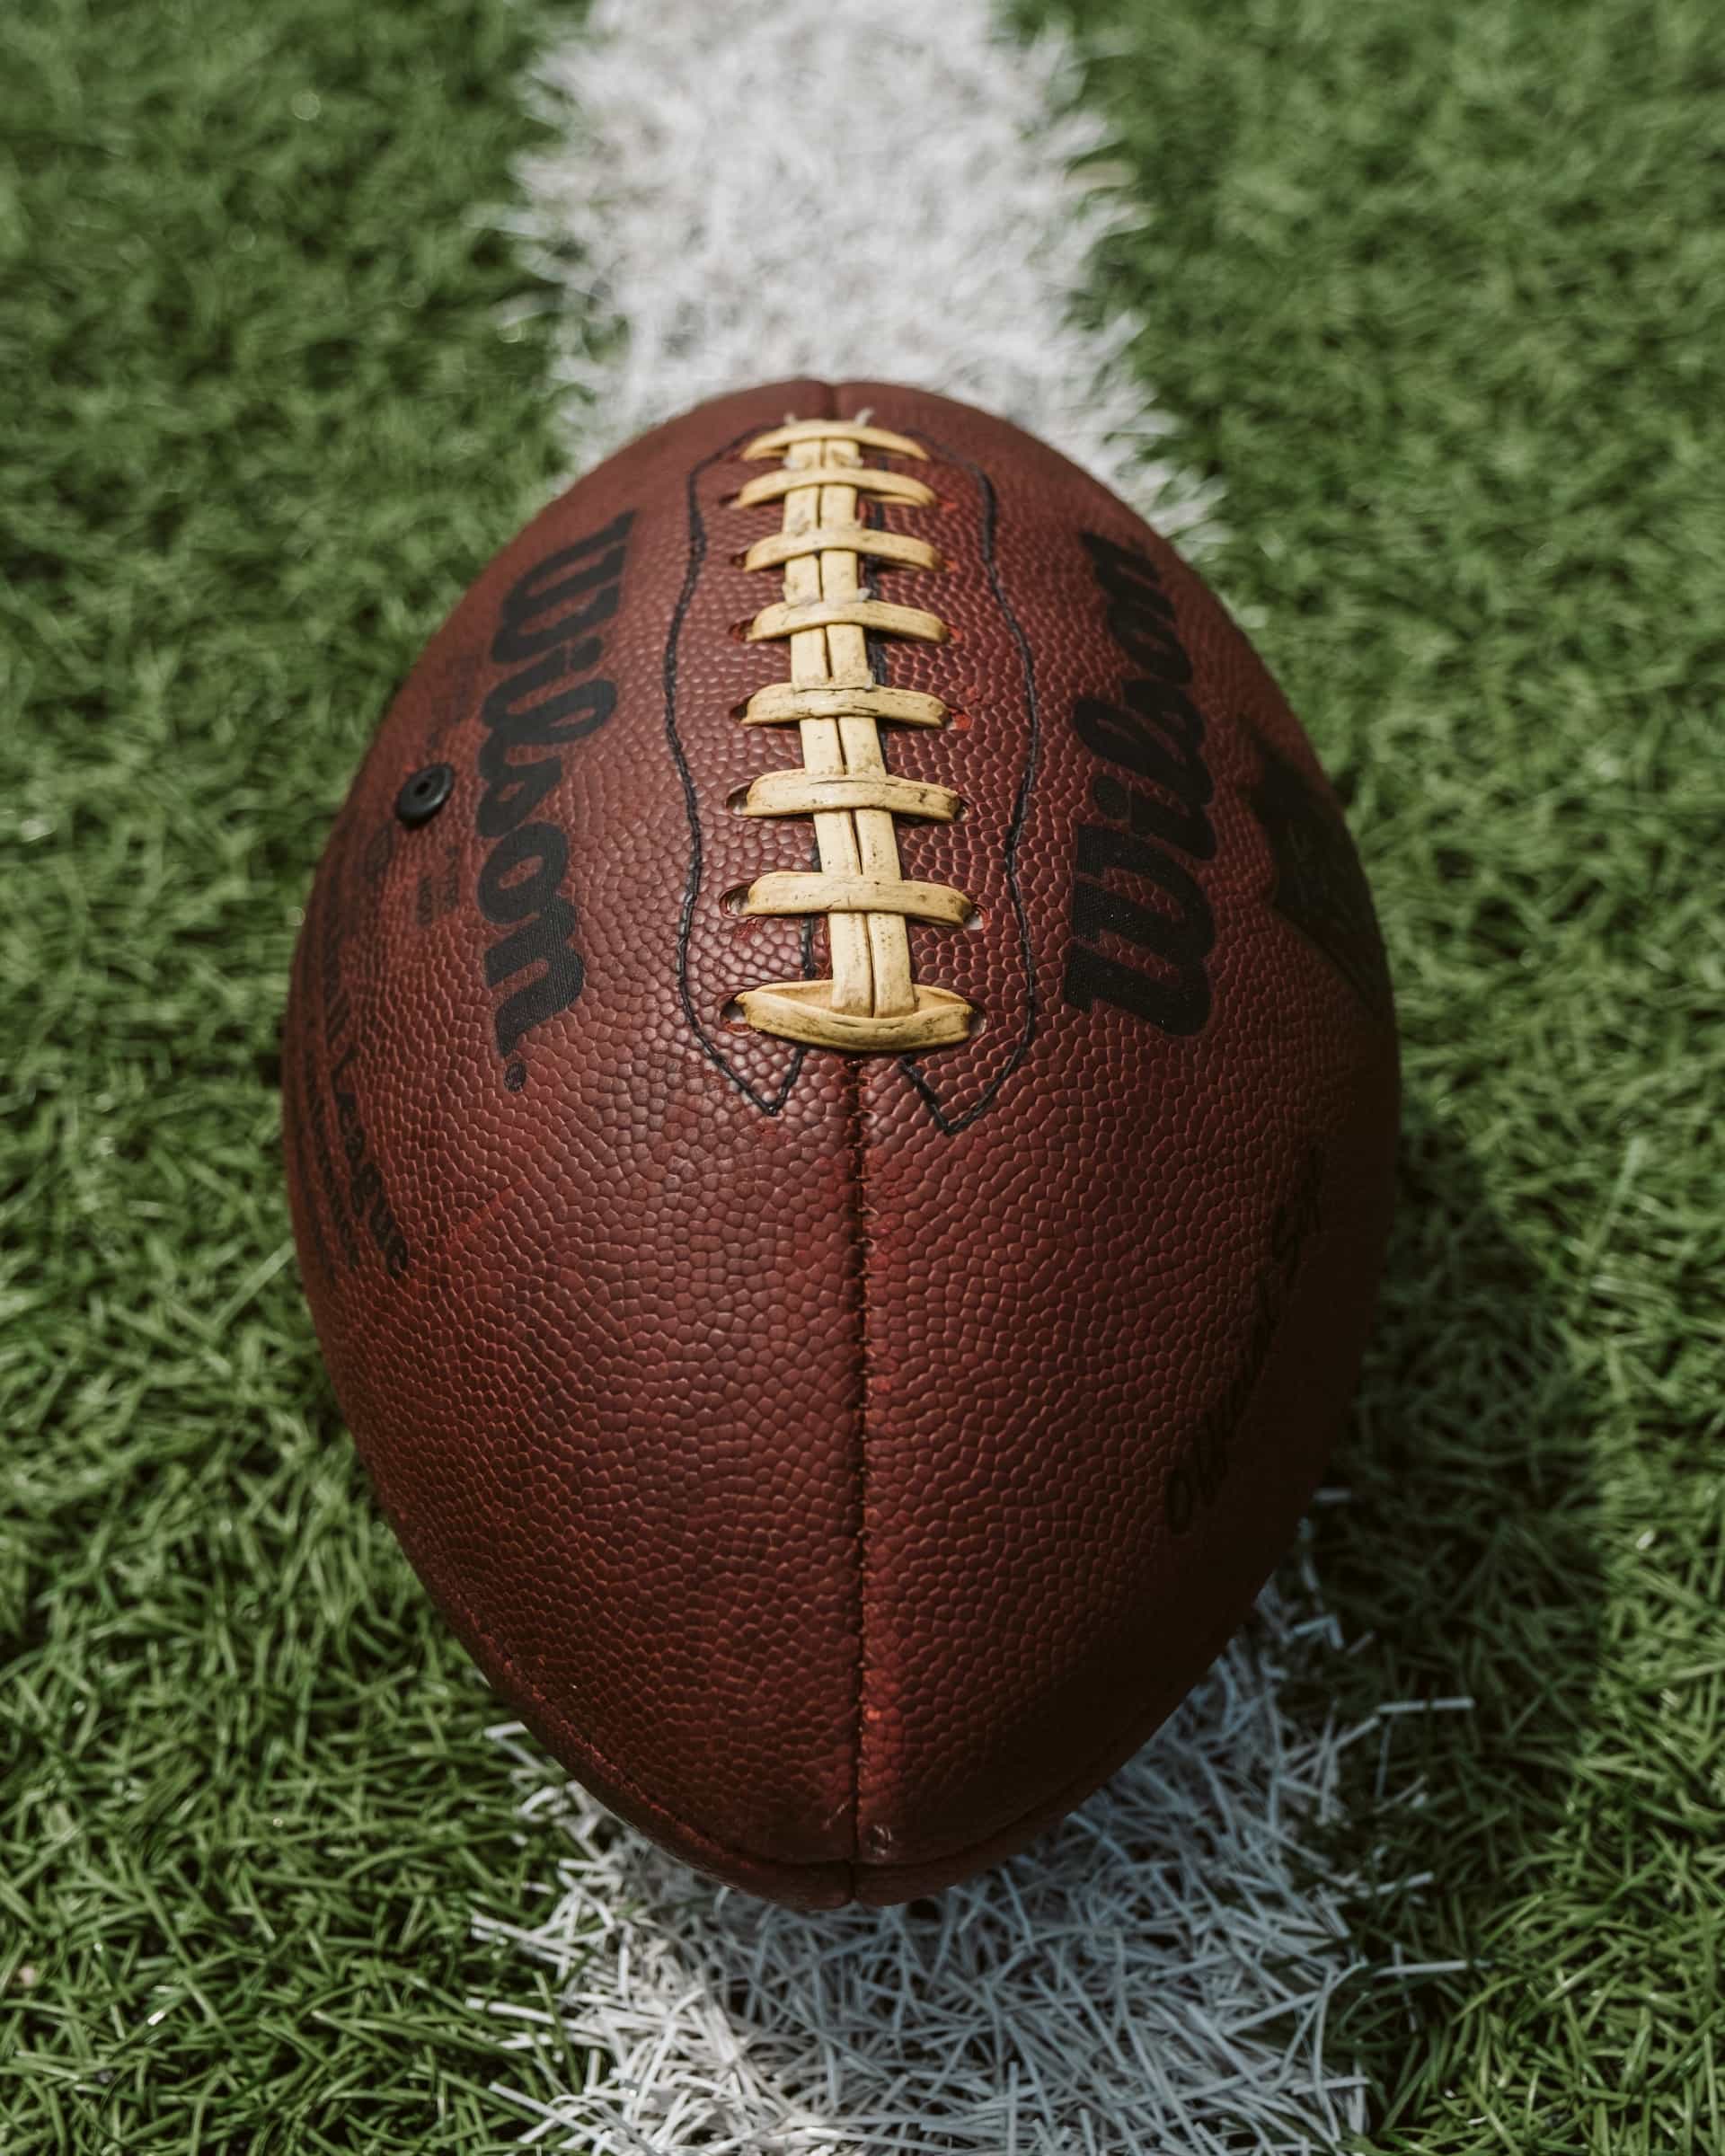 An American football with its iconic ribbed spine sitting on a pitch before a game.